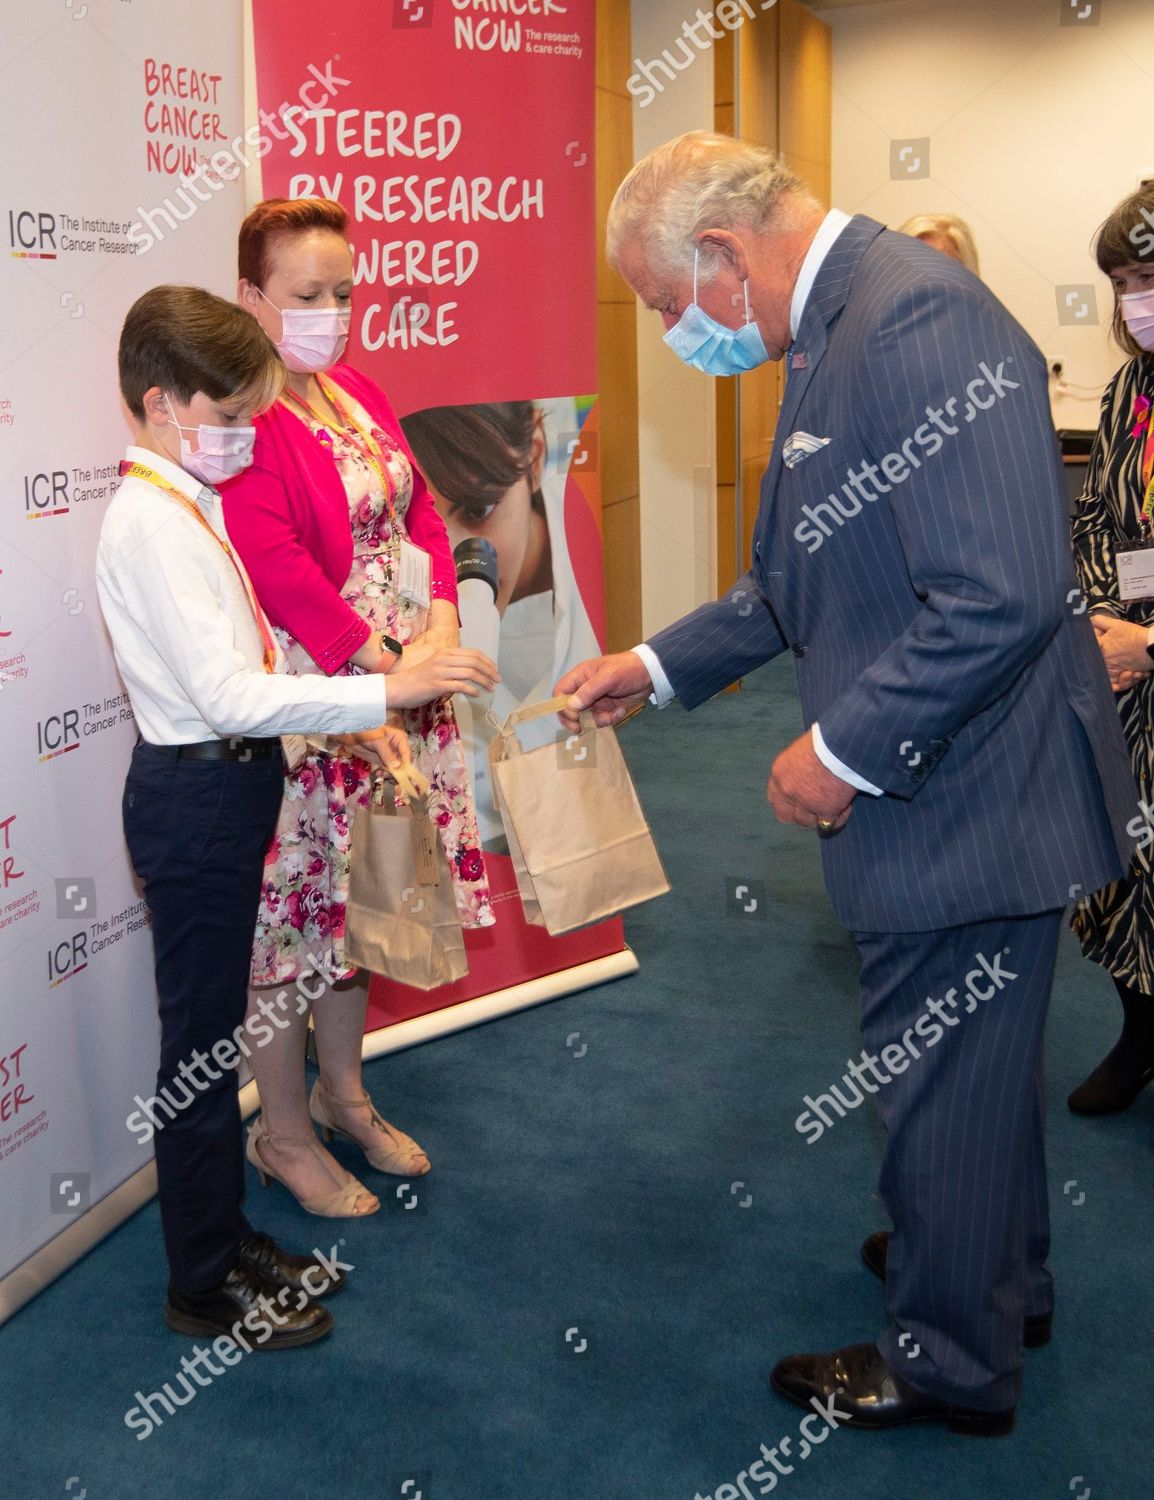 prince-charles-visits-the-breast-cancer-now-toby-robins-research-centre-london-uk-shutterstock-editorial-11902309m.jpg